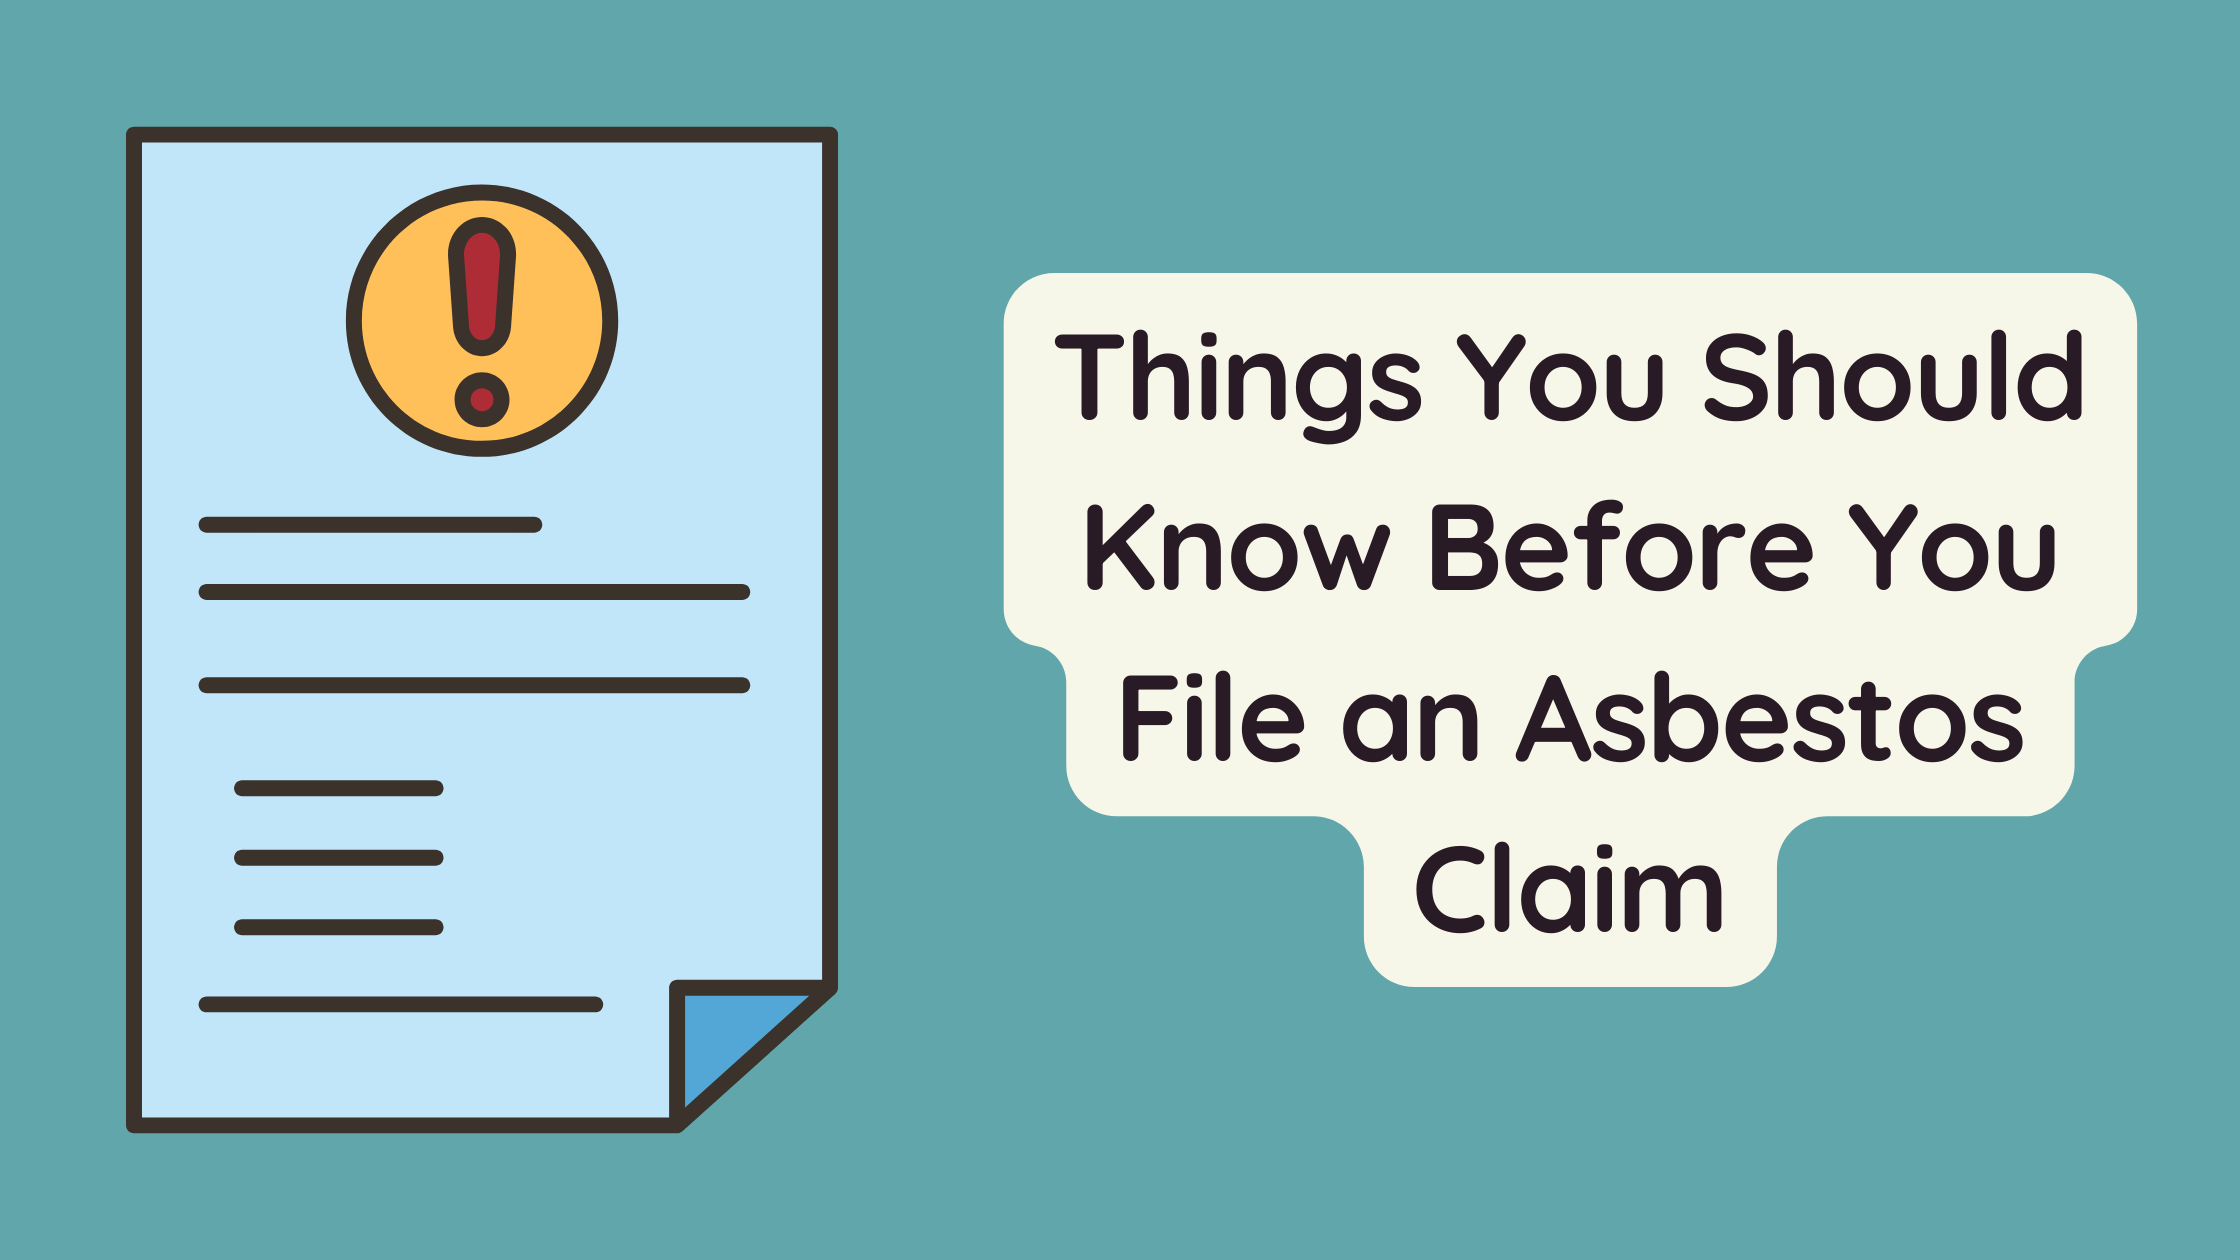 Things You Should Know Before You File an Asbestos Claim